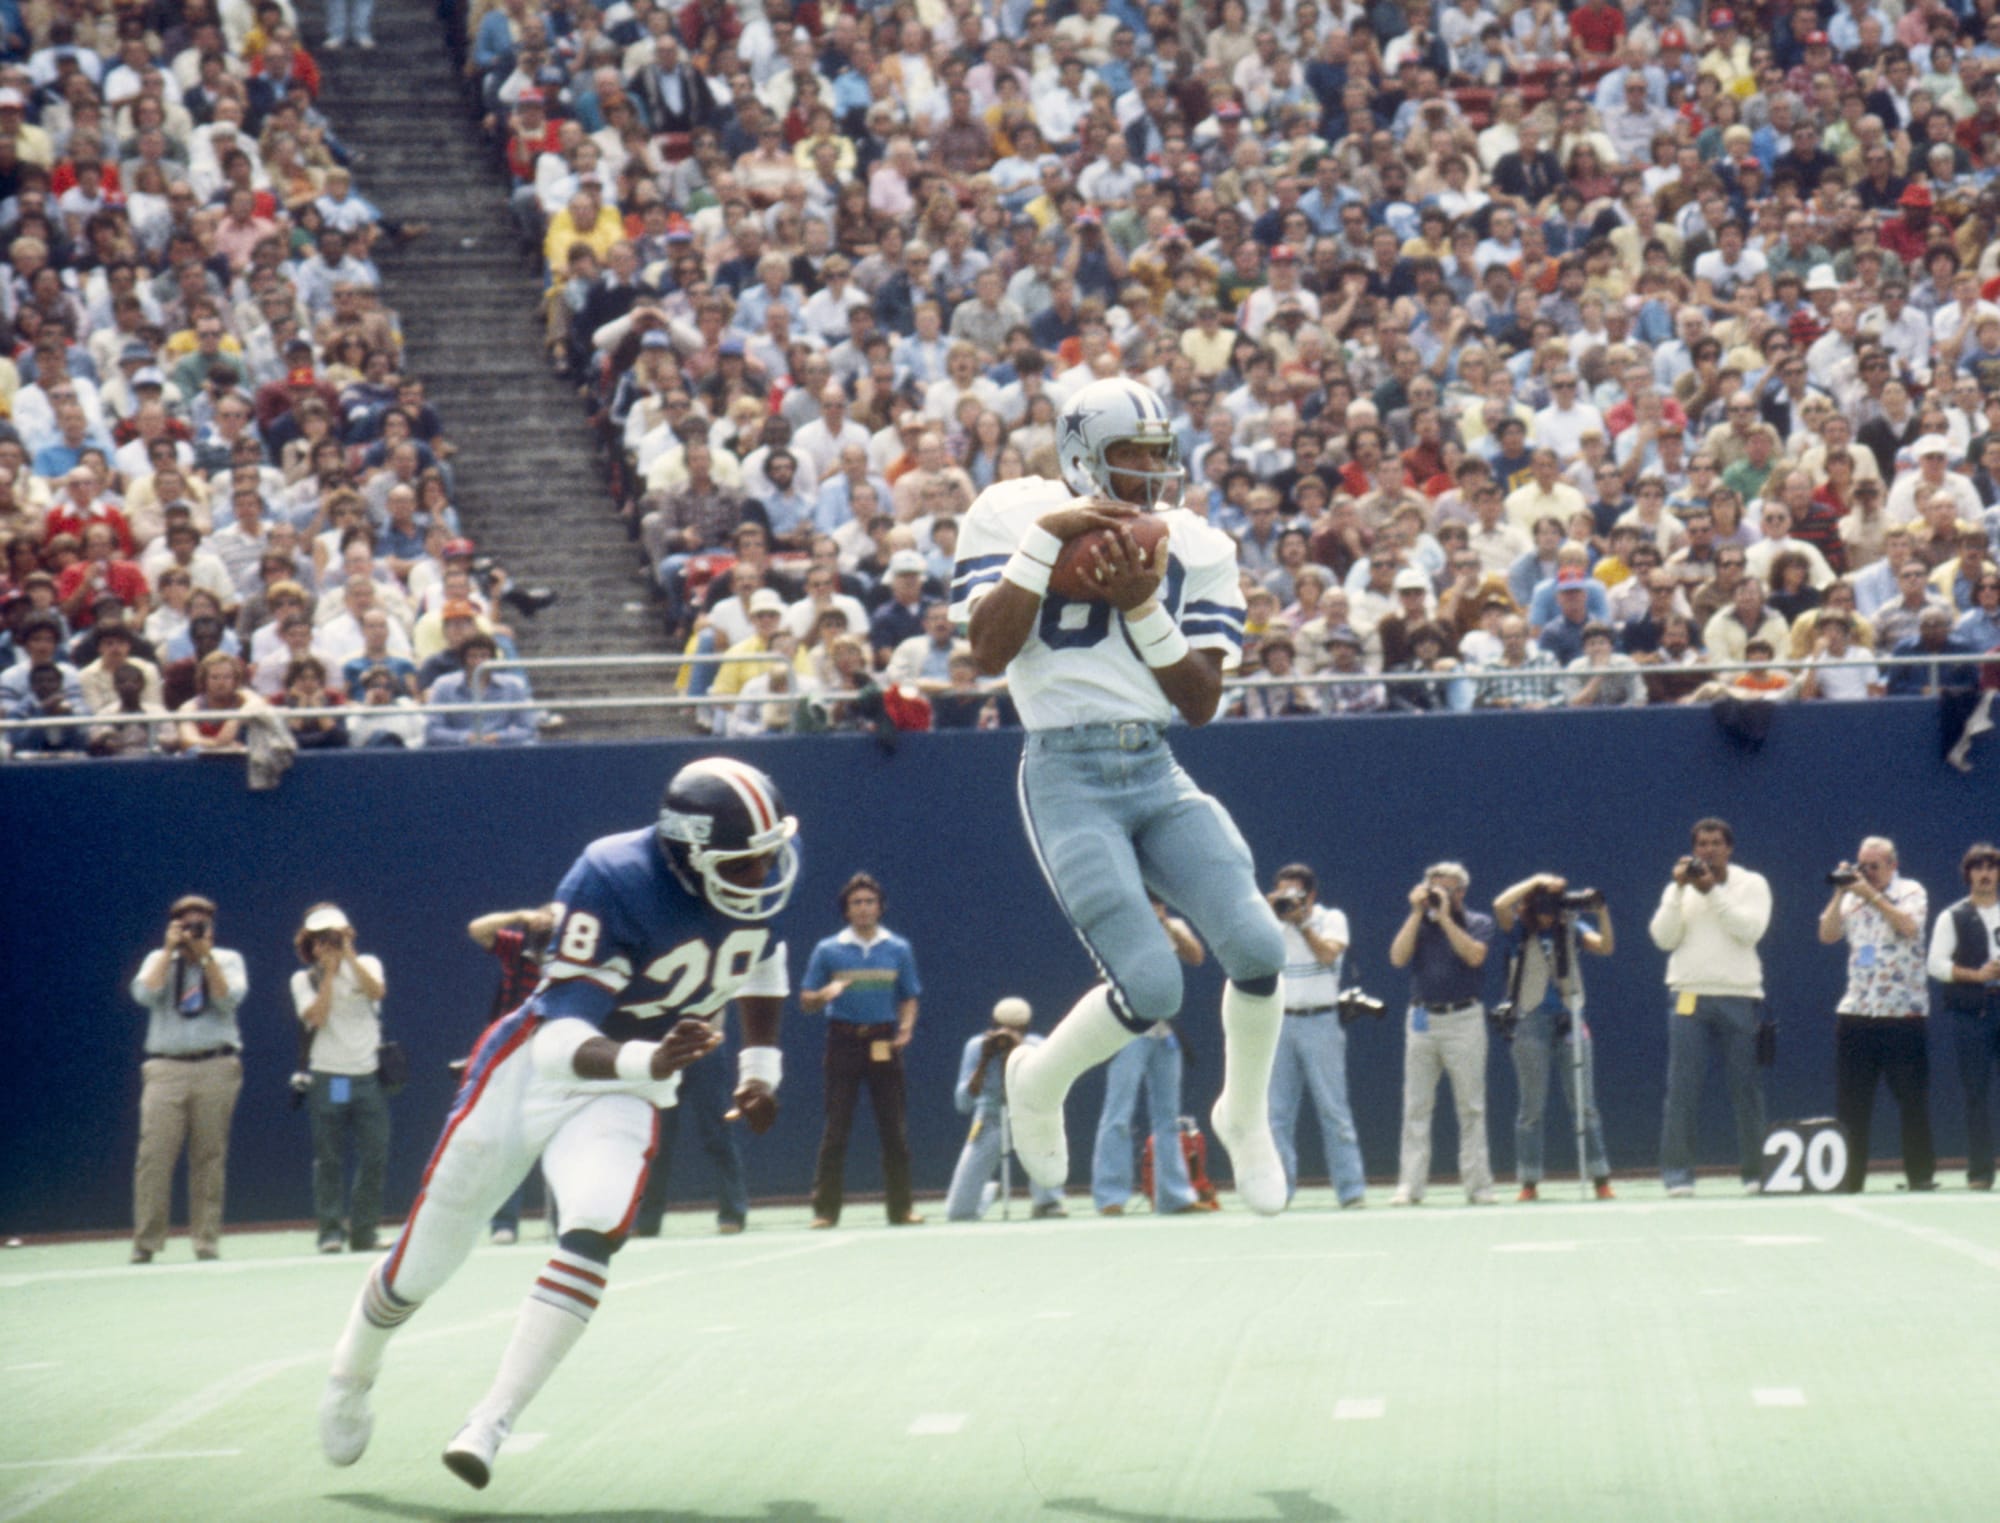 Dallas Cowboys wide receiver Drew Pearson is Hall of Fame worthy